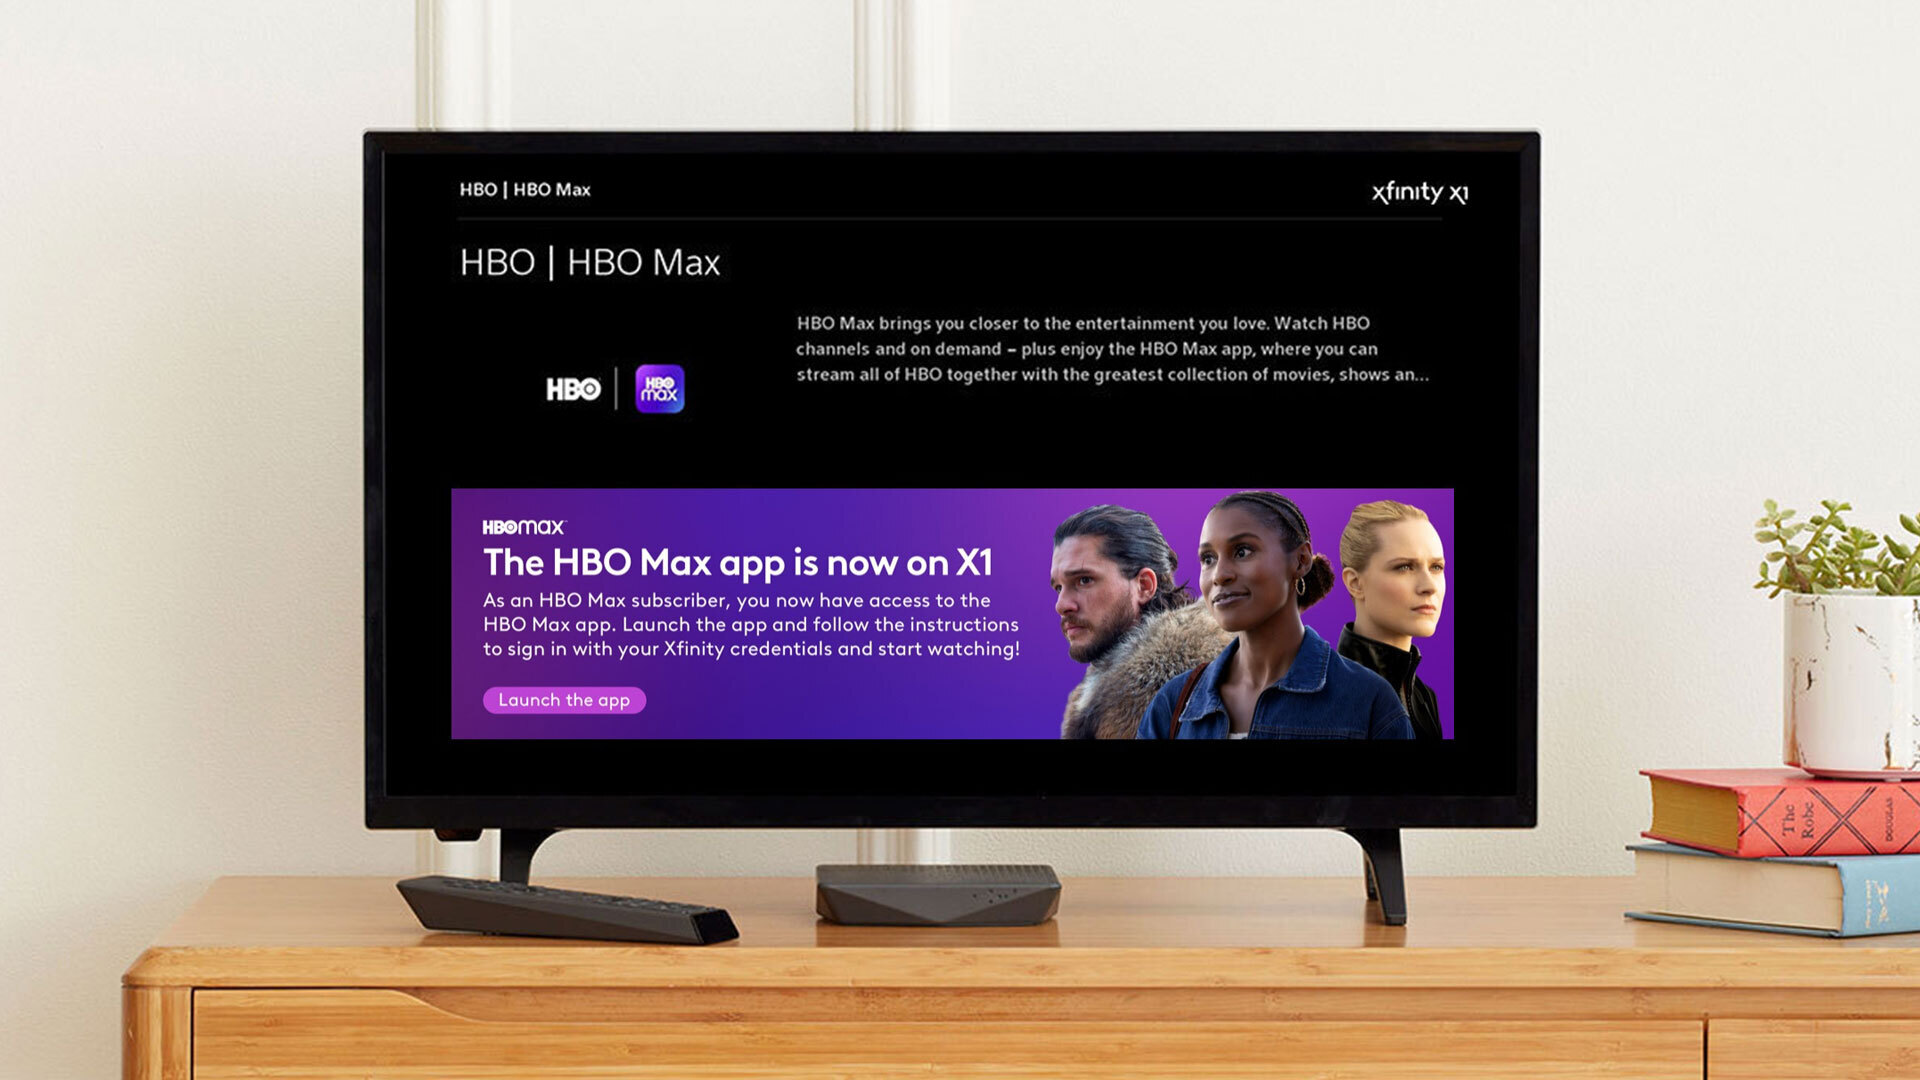 HBO Max app now available on Xfinity X1 and Flex -- just in time for Wonder Woman 1984